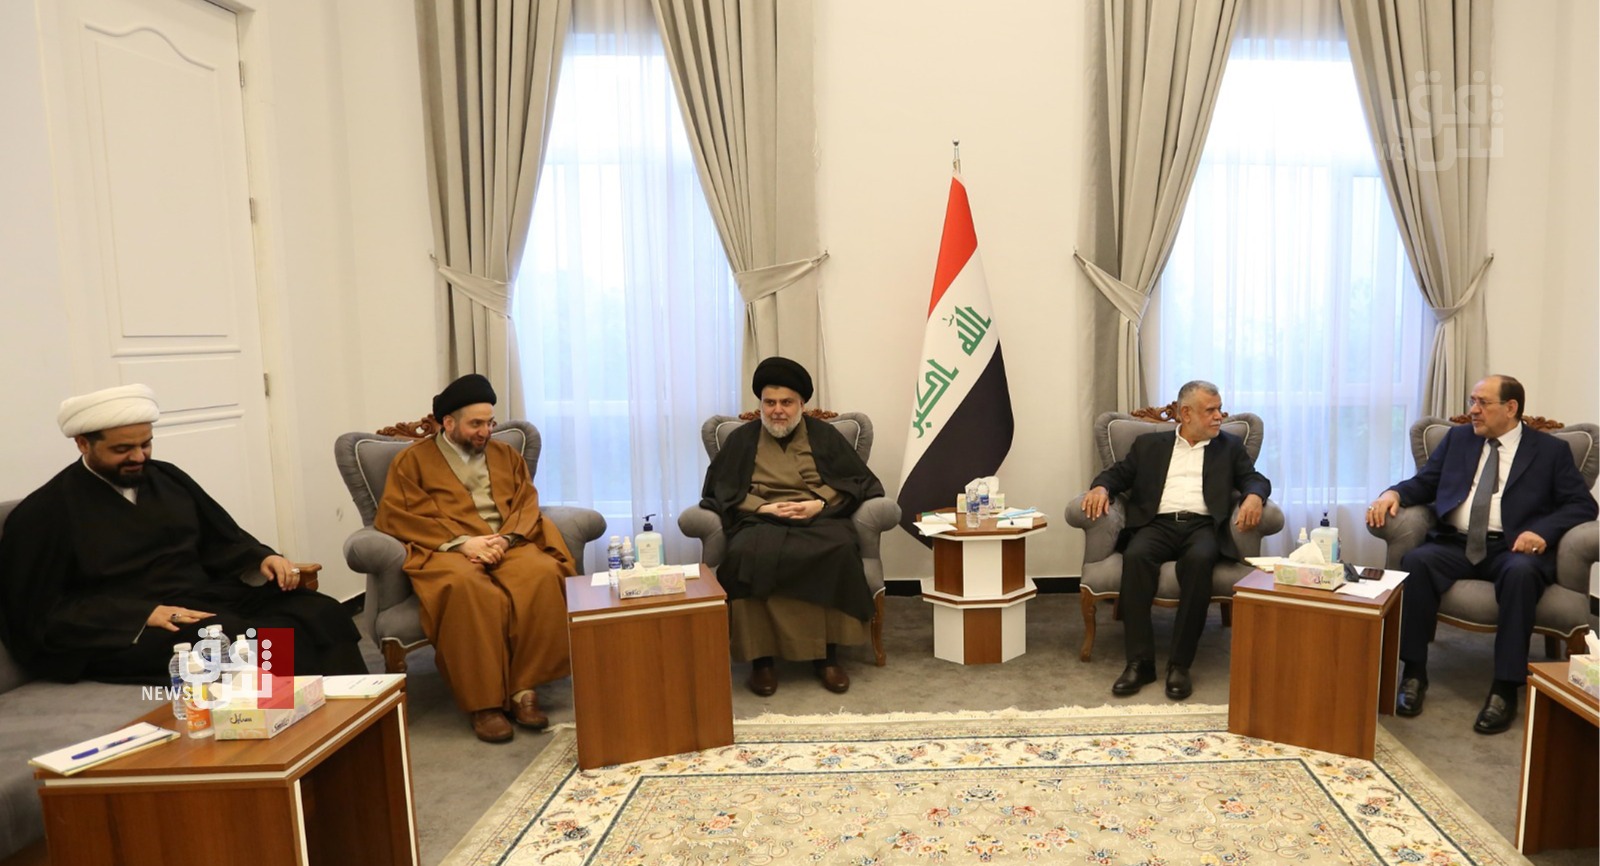 In continuous meetings - the coordination framework is looking for mechanisms that prevent Al-Sadr from using the street